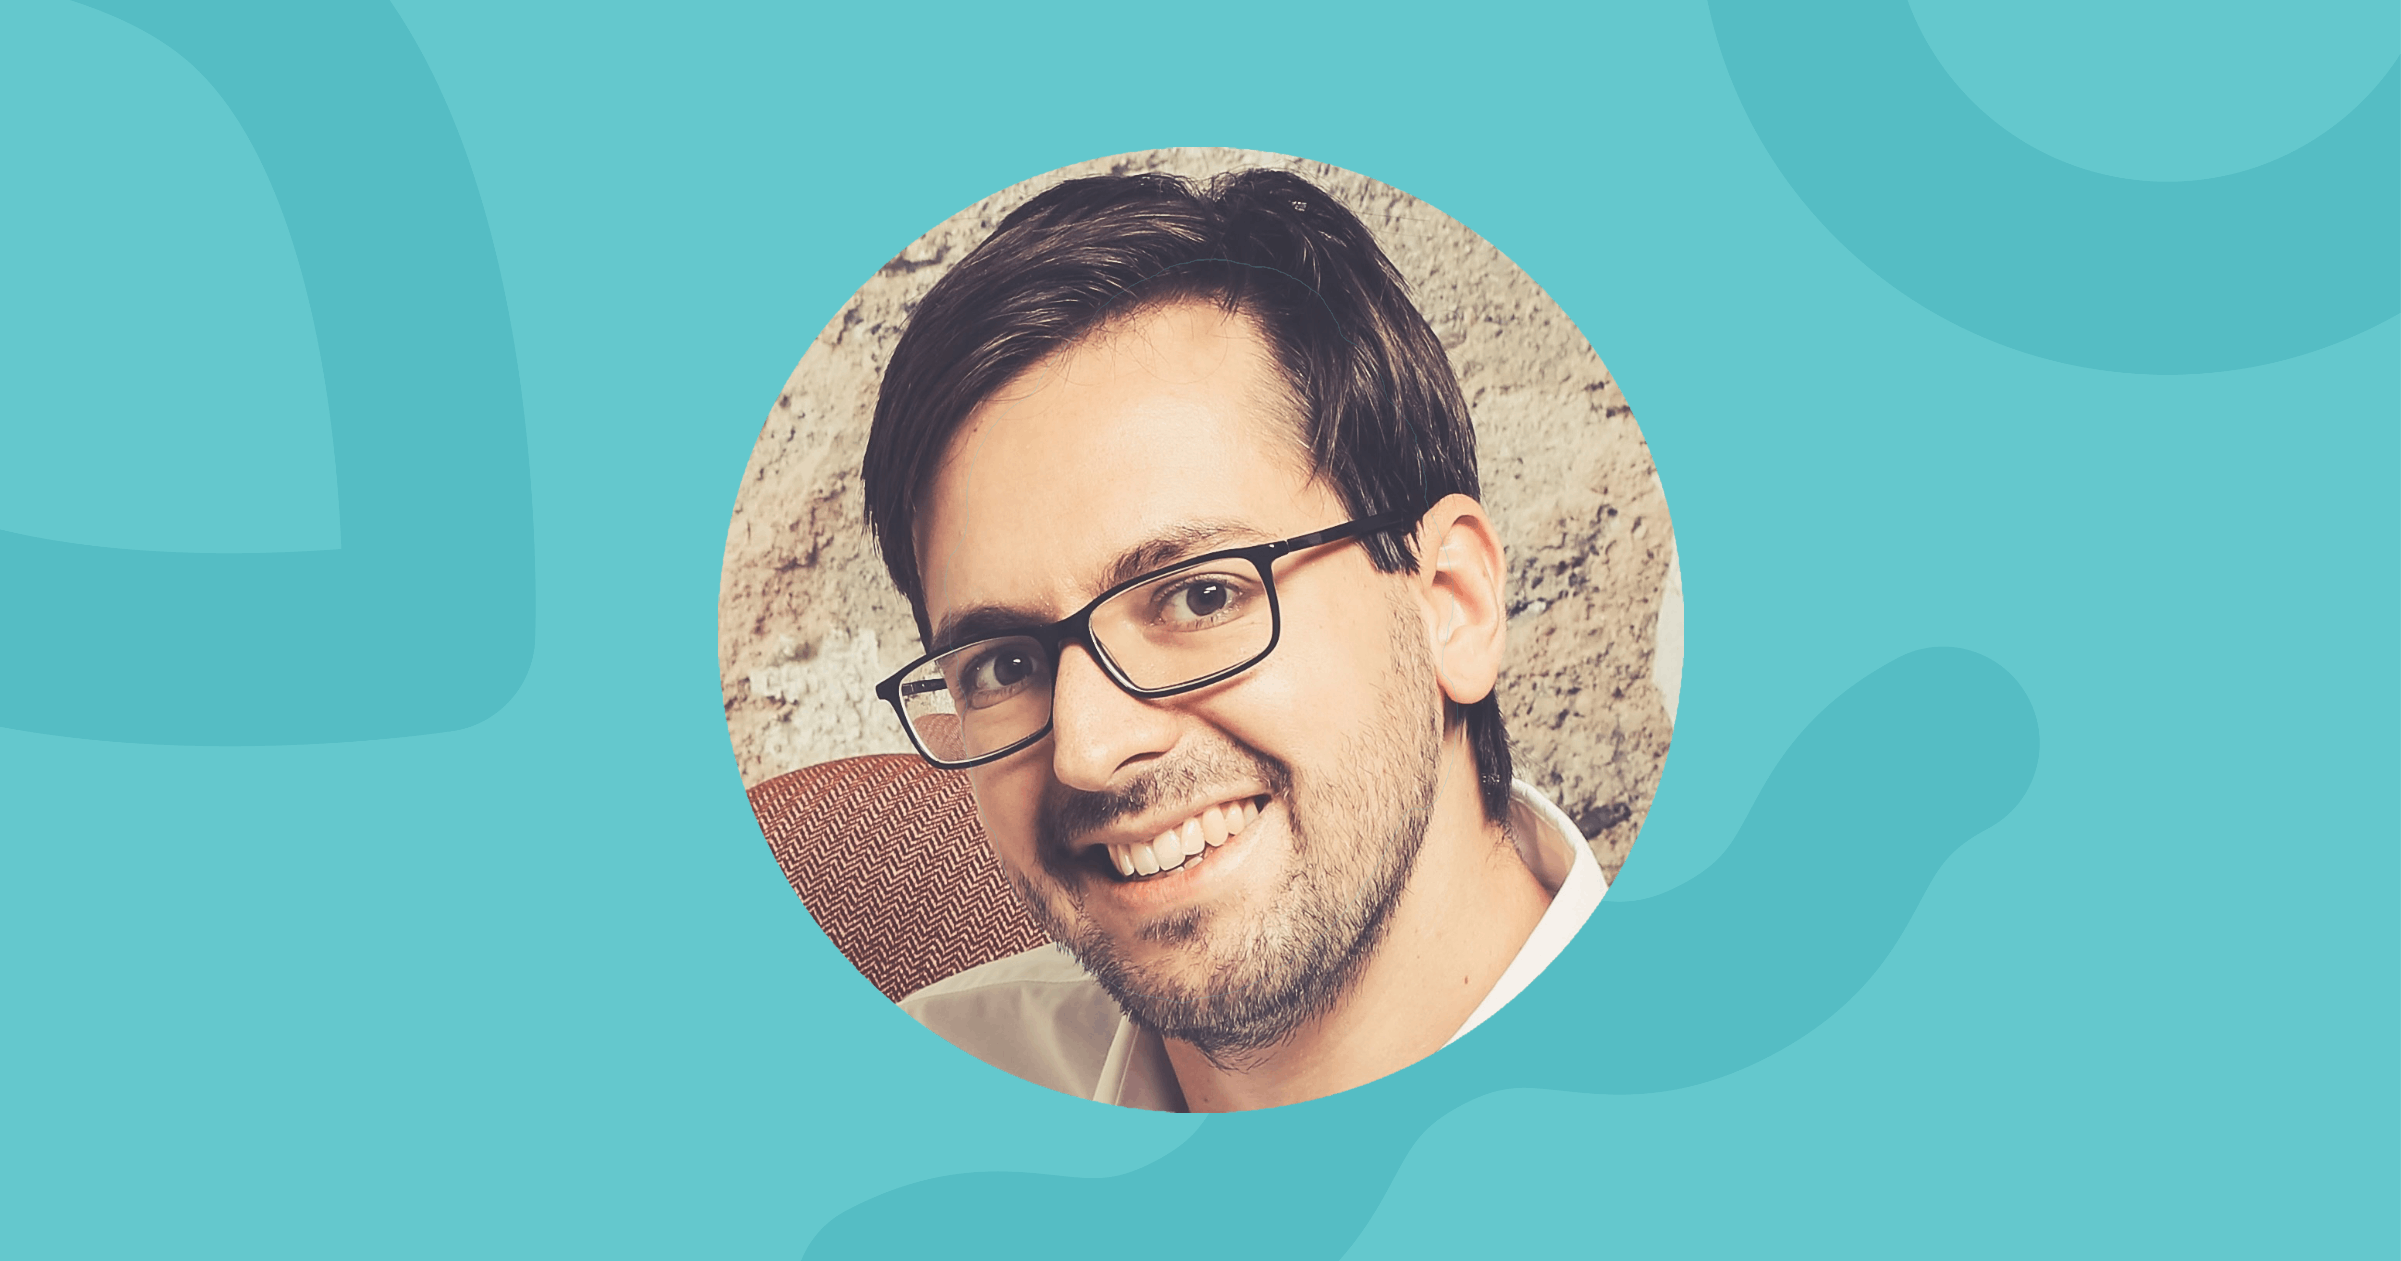 Meet Marco! One of our software engineers